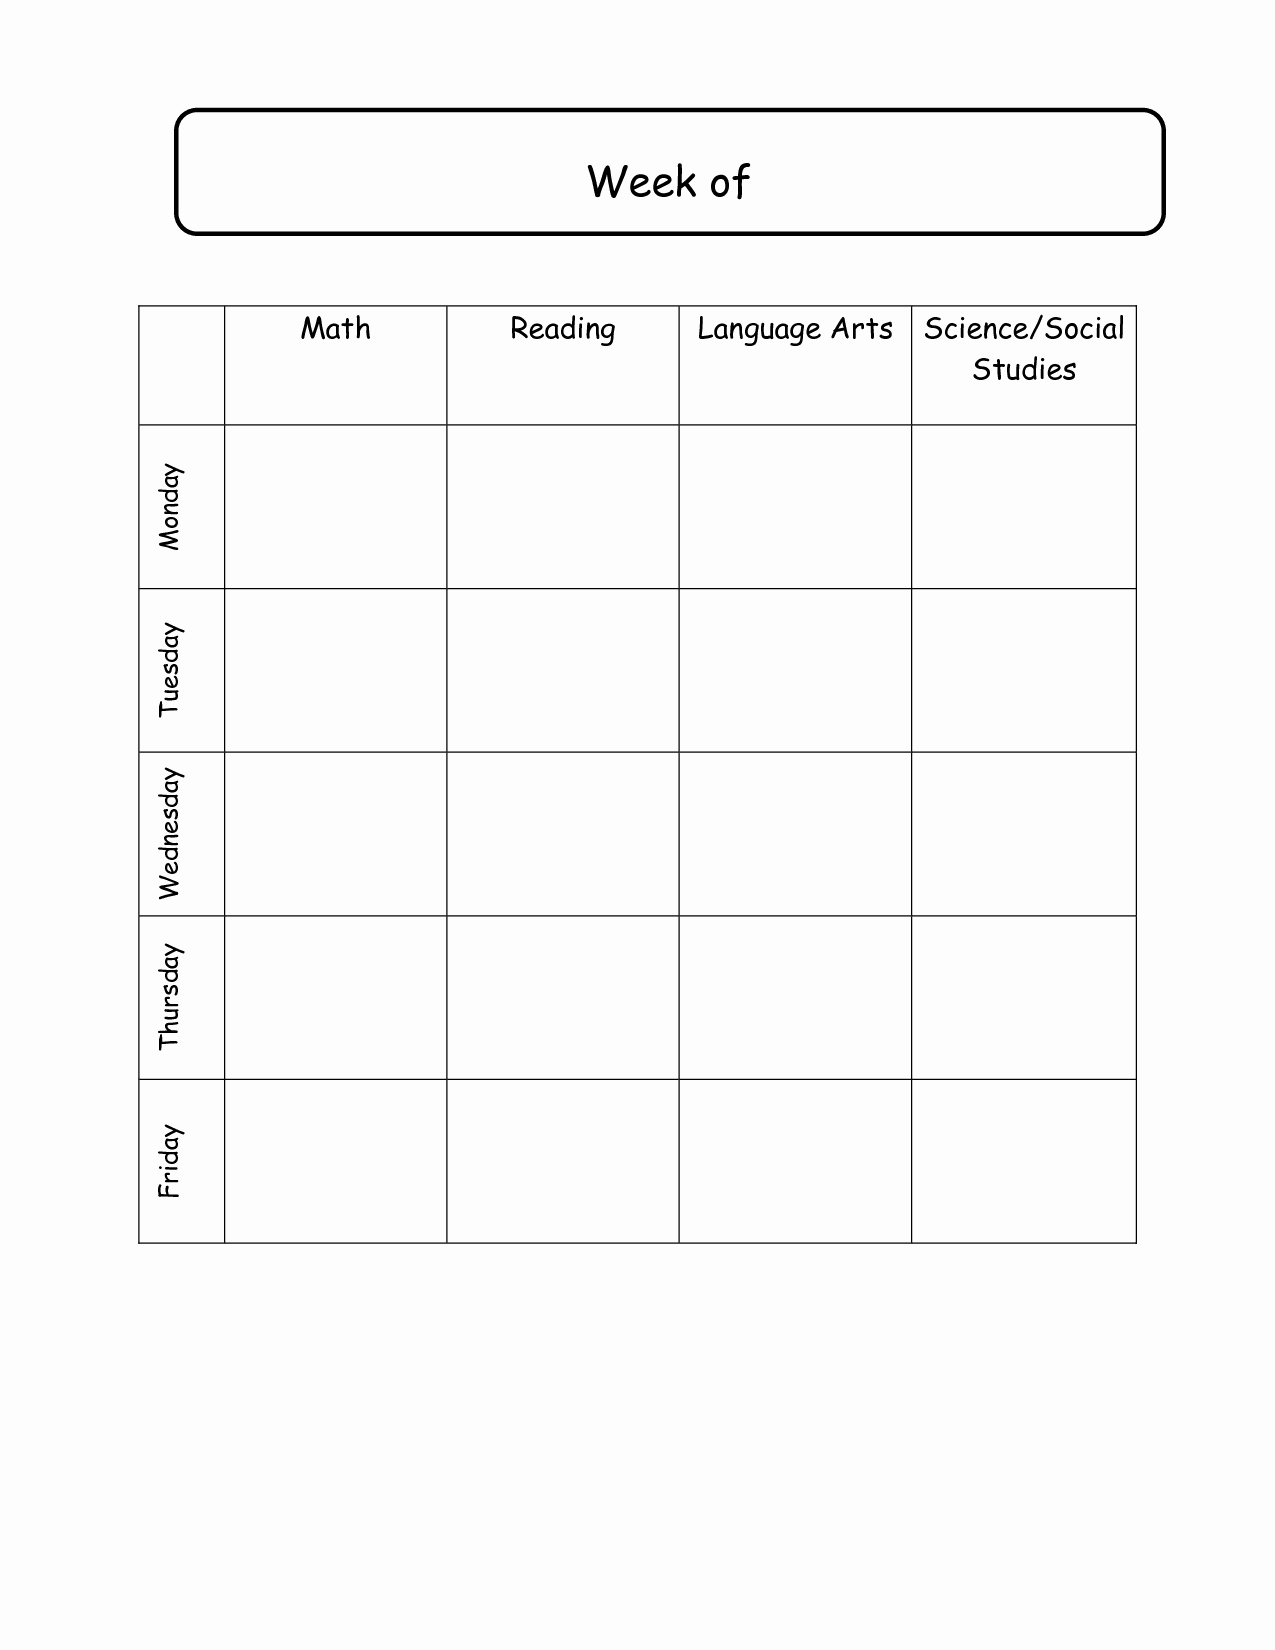 Elementary Lesson Plan Template Best Of Elementary School Daily Schedule Template